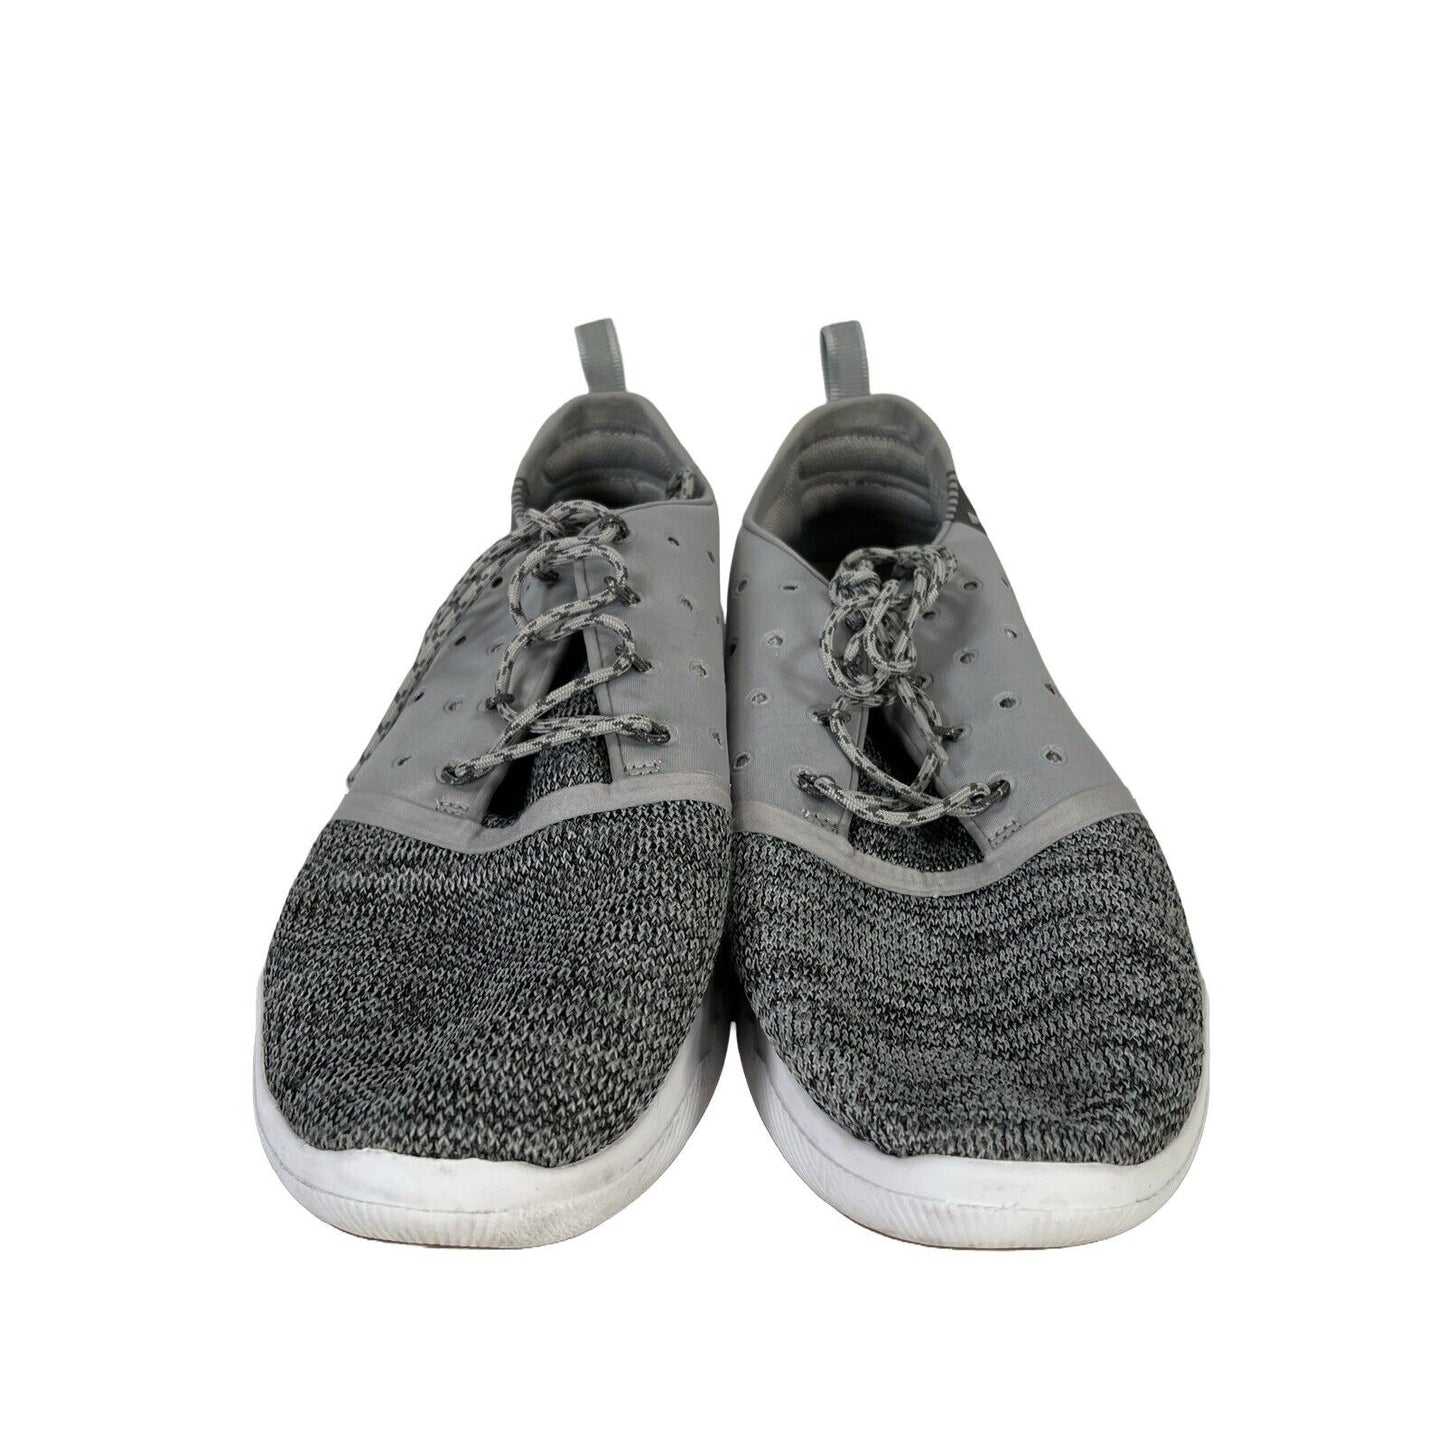 Under Armour Men's Gray Lace Up Charged 2 Athletic Running Shoes - 11